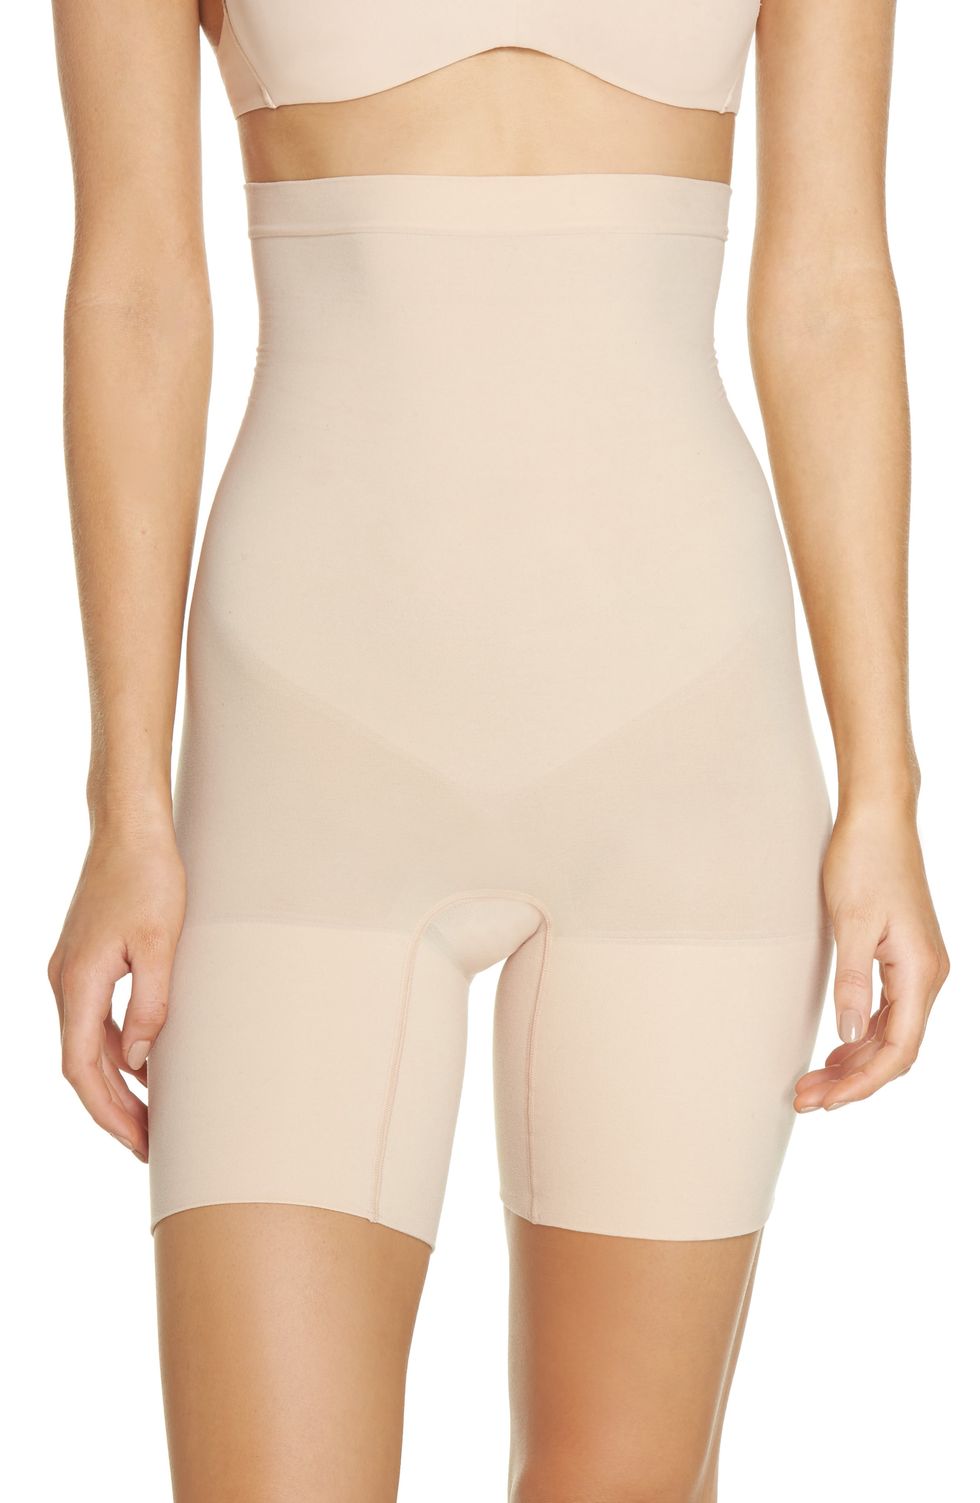 20 Shapewear Deals at Nordstrom's Early-Access Anniversary Sale